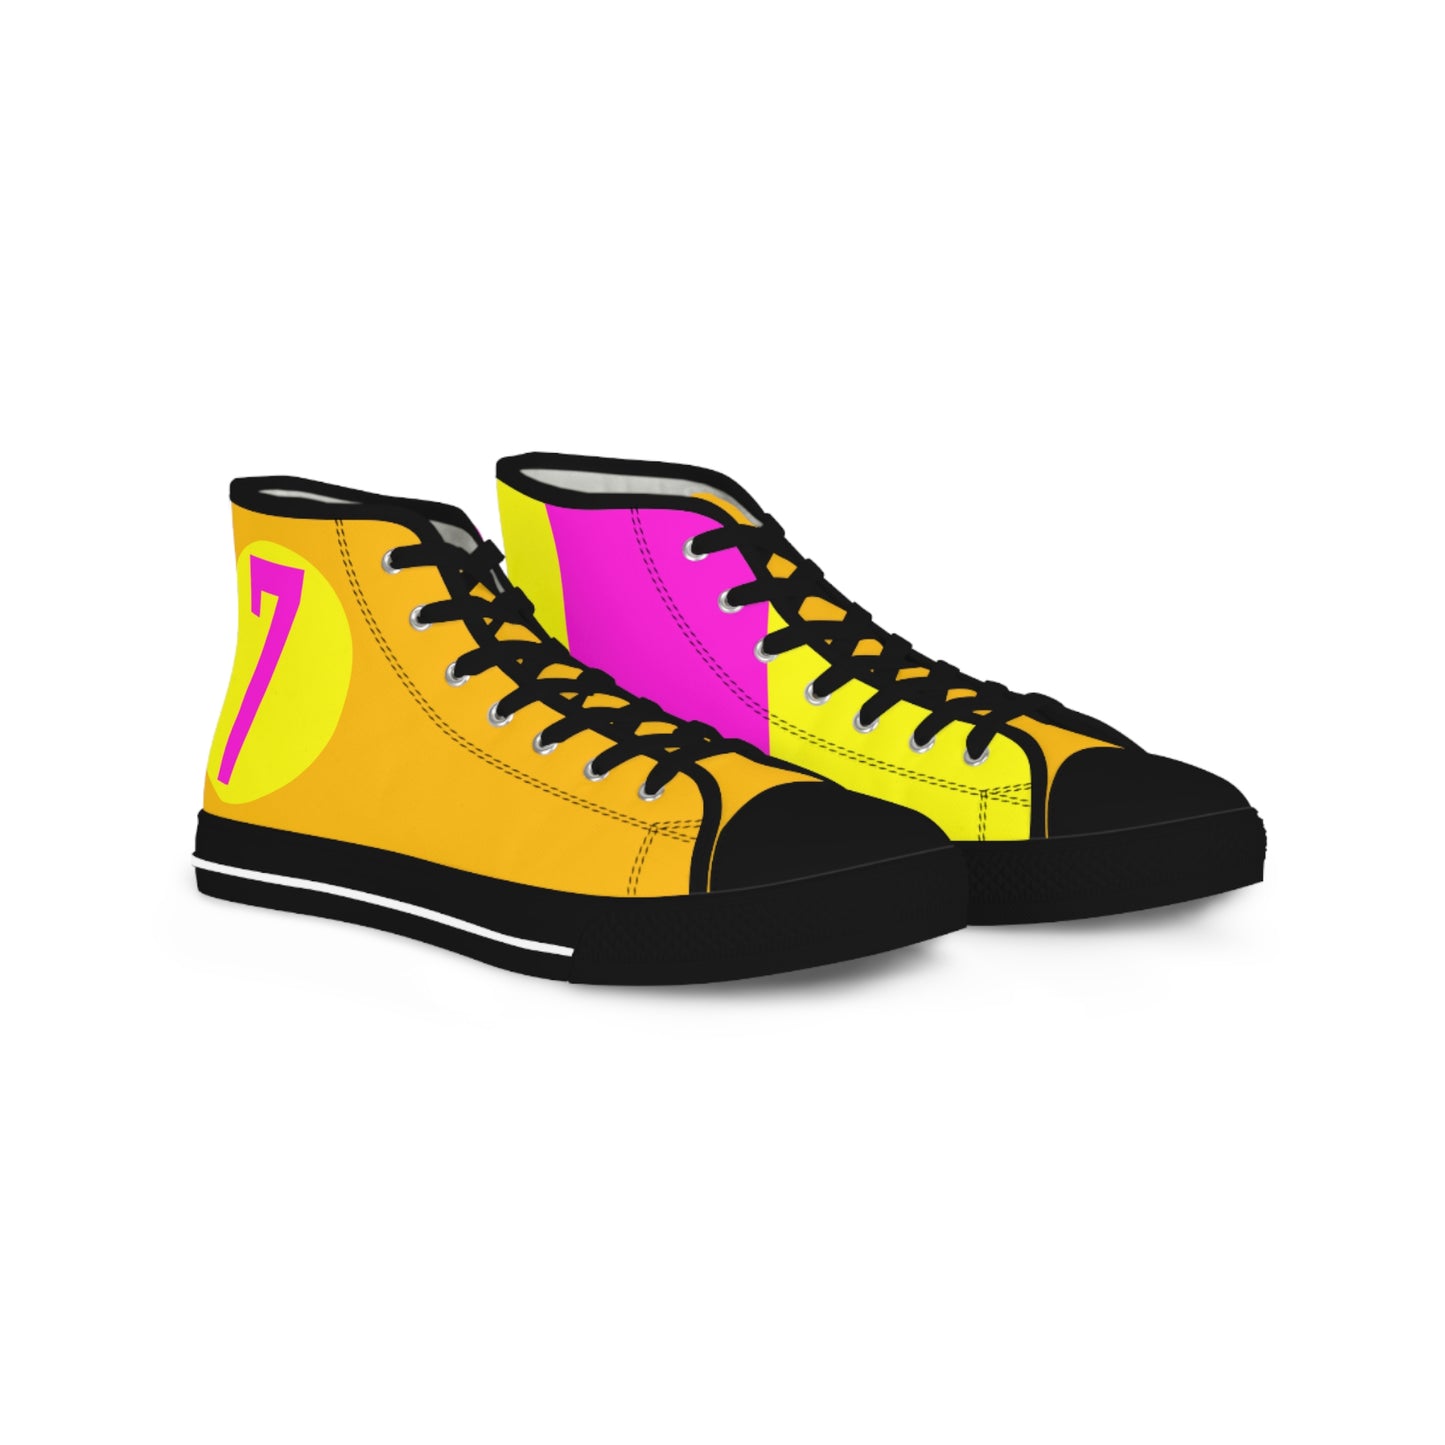 Limited Edition High Top Sneakers - 7